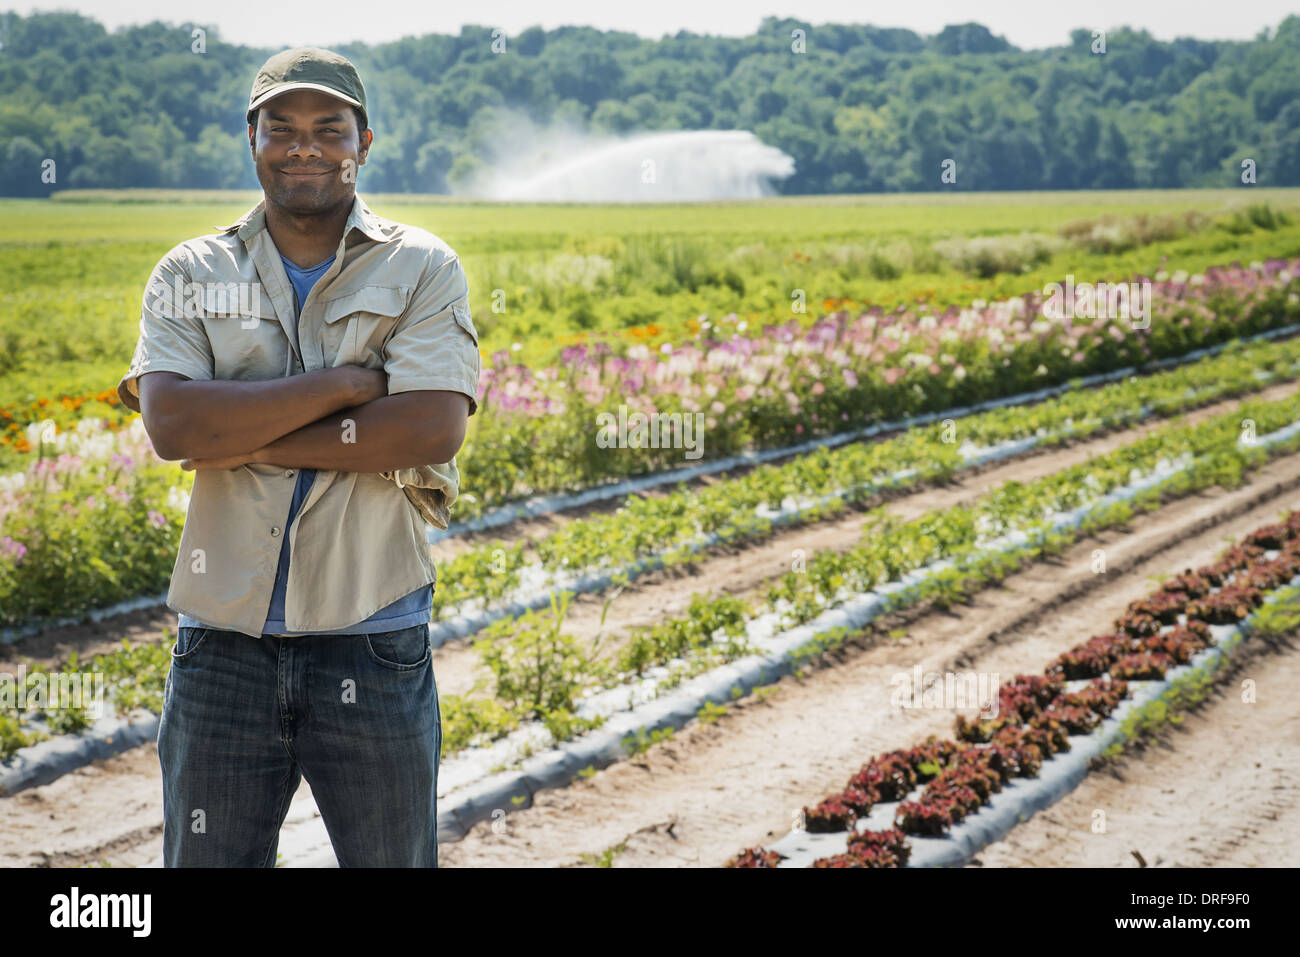 New York state USA man with arms folded fresh salad vegetable crops Stock Photo